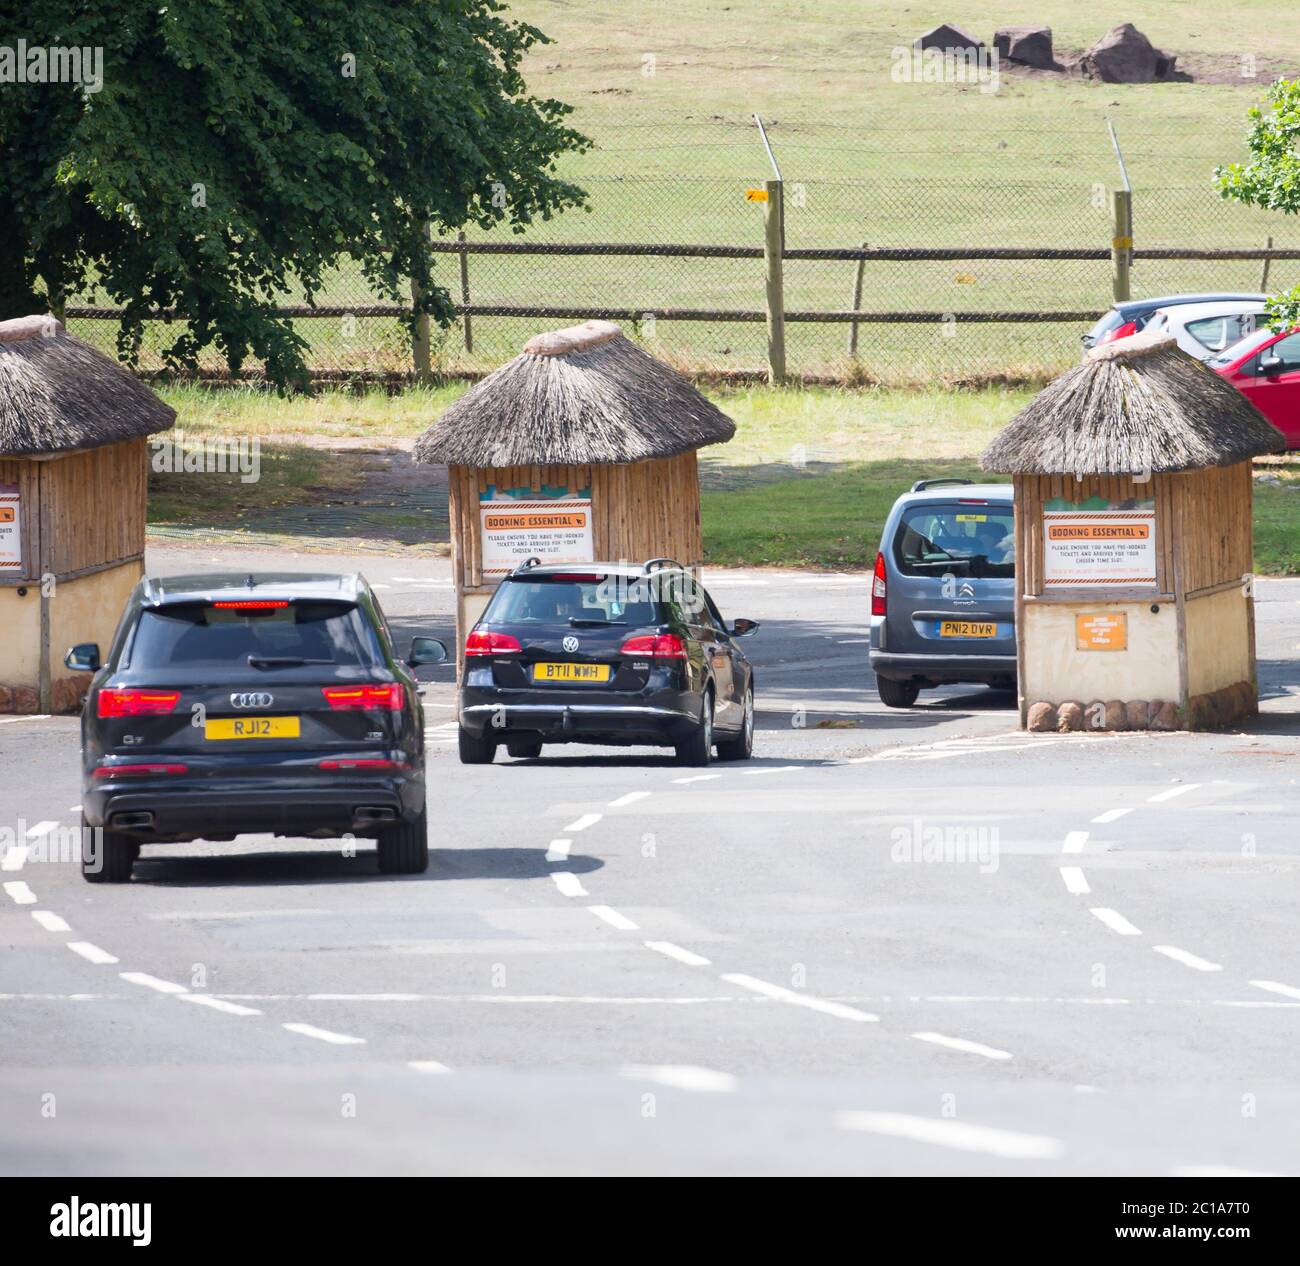 Bewdley, UK. 15th June, 2020. As coronavirus lockdown restrictions ease, West Midland Safari Park welcomes visitors back. Having pre-booked their timed tickets, the cars arrive steadily at regular intervals - animal lovers desperate to enjoy the drive-through safari experience with safe, well-managed social distancing. Credit: Lee Hudson/Alamy Live News Stock Photo